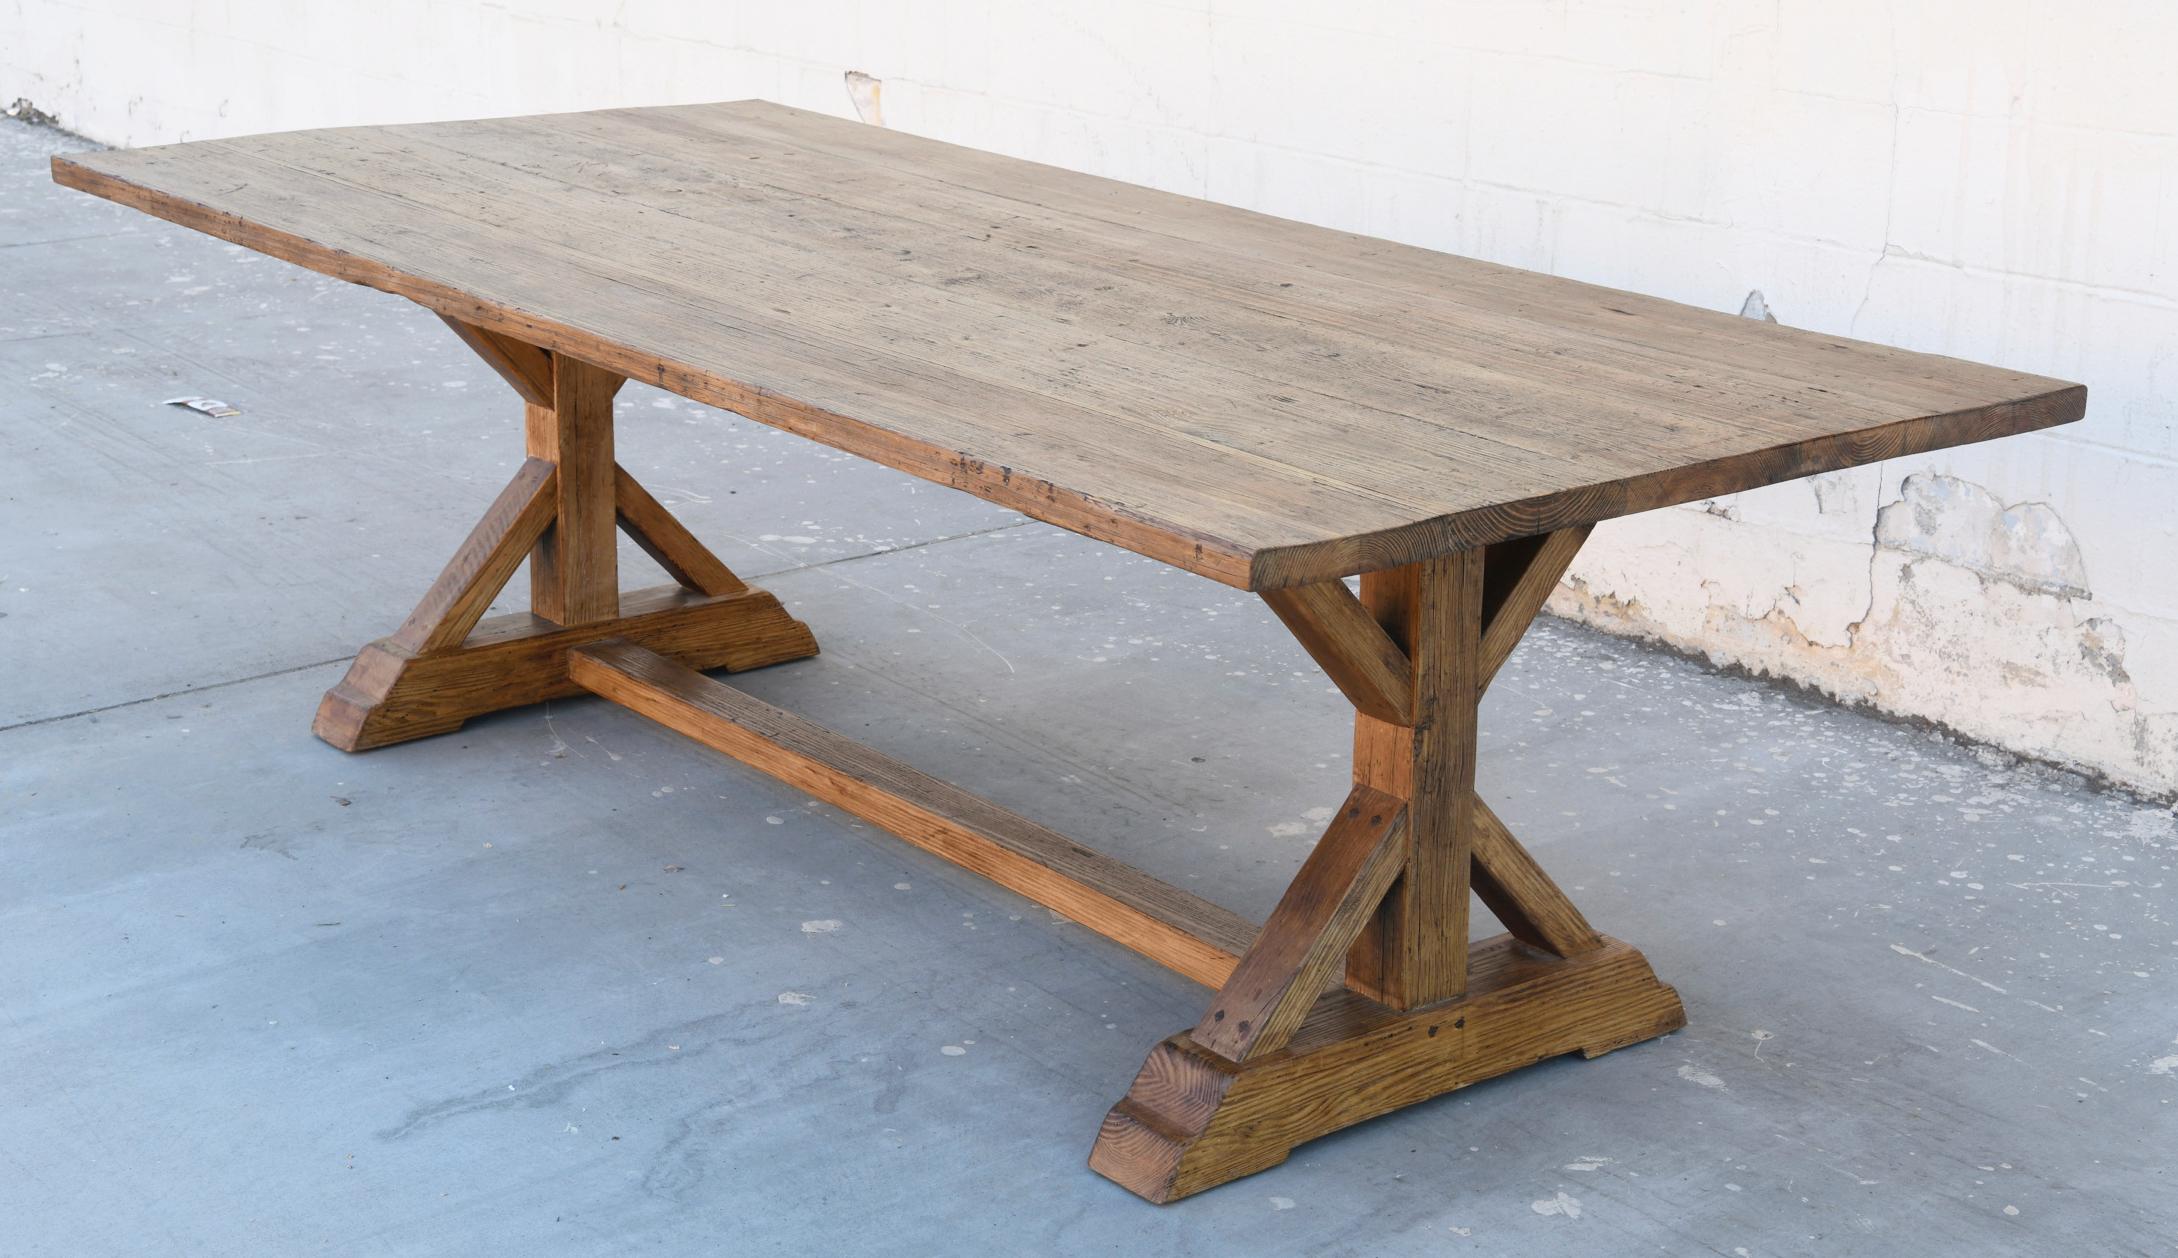 This farm table made from reclaimed pine, it is seen here in 112